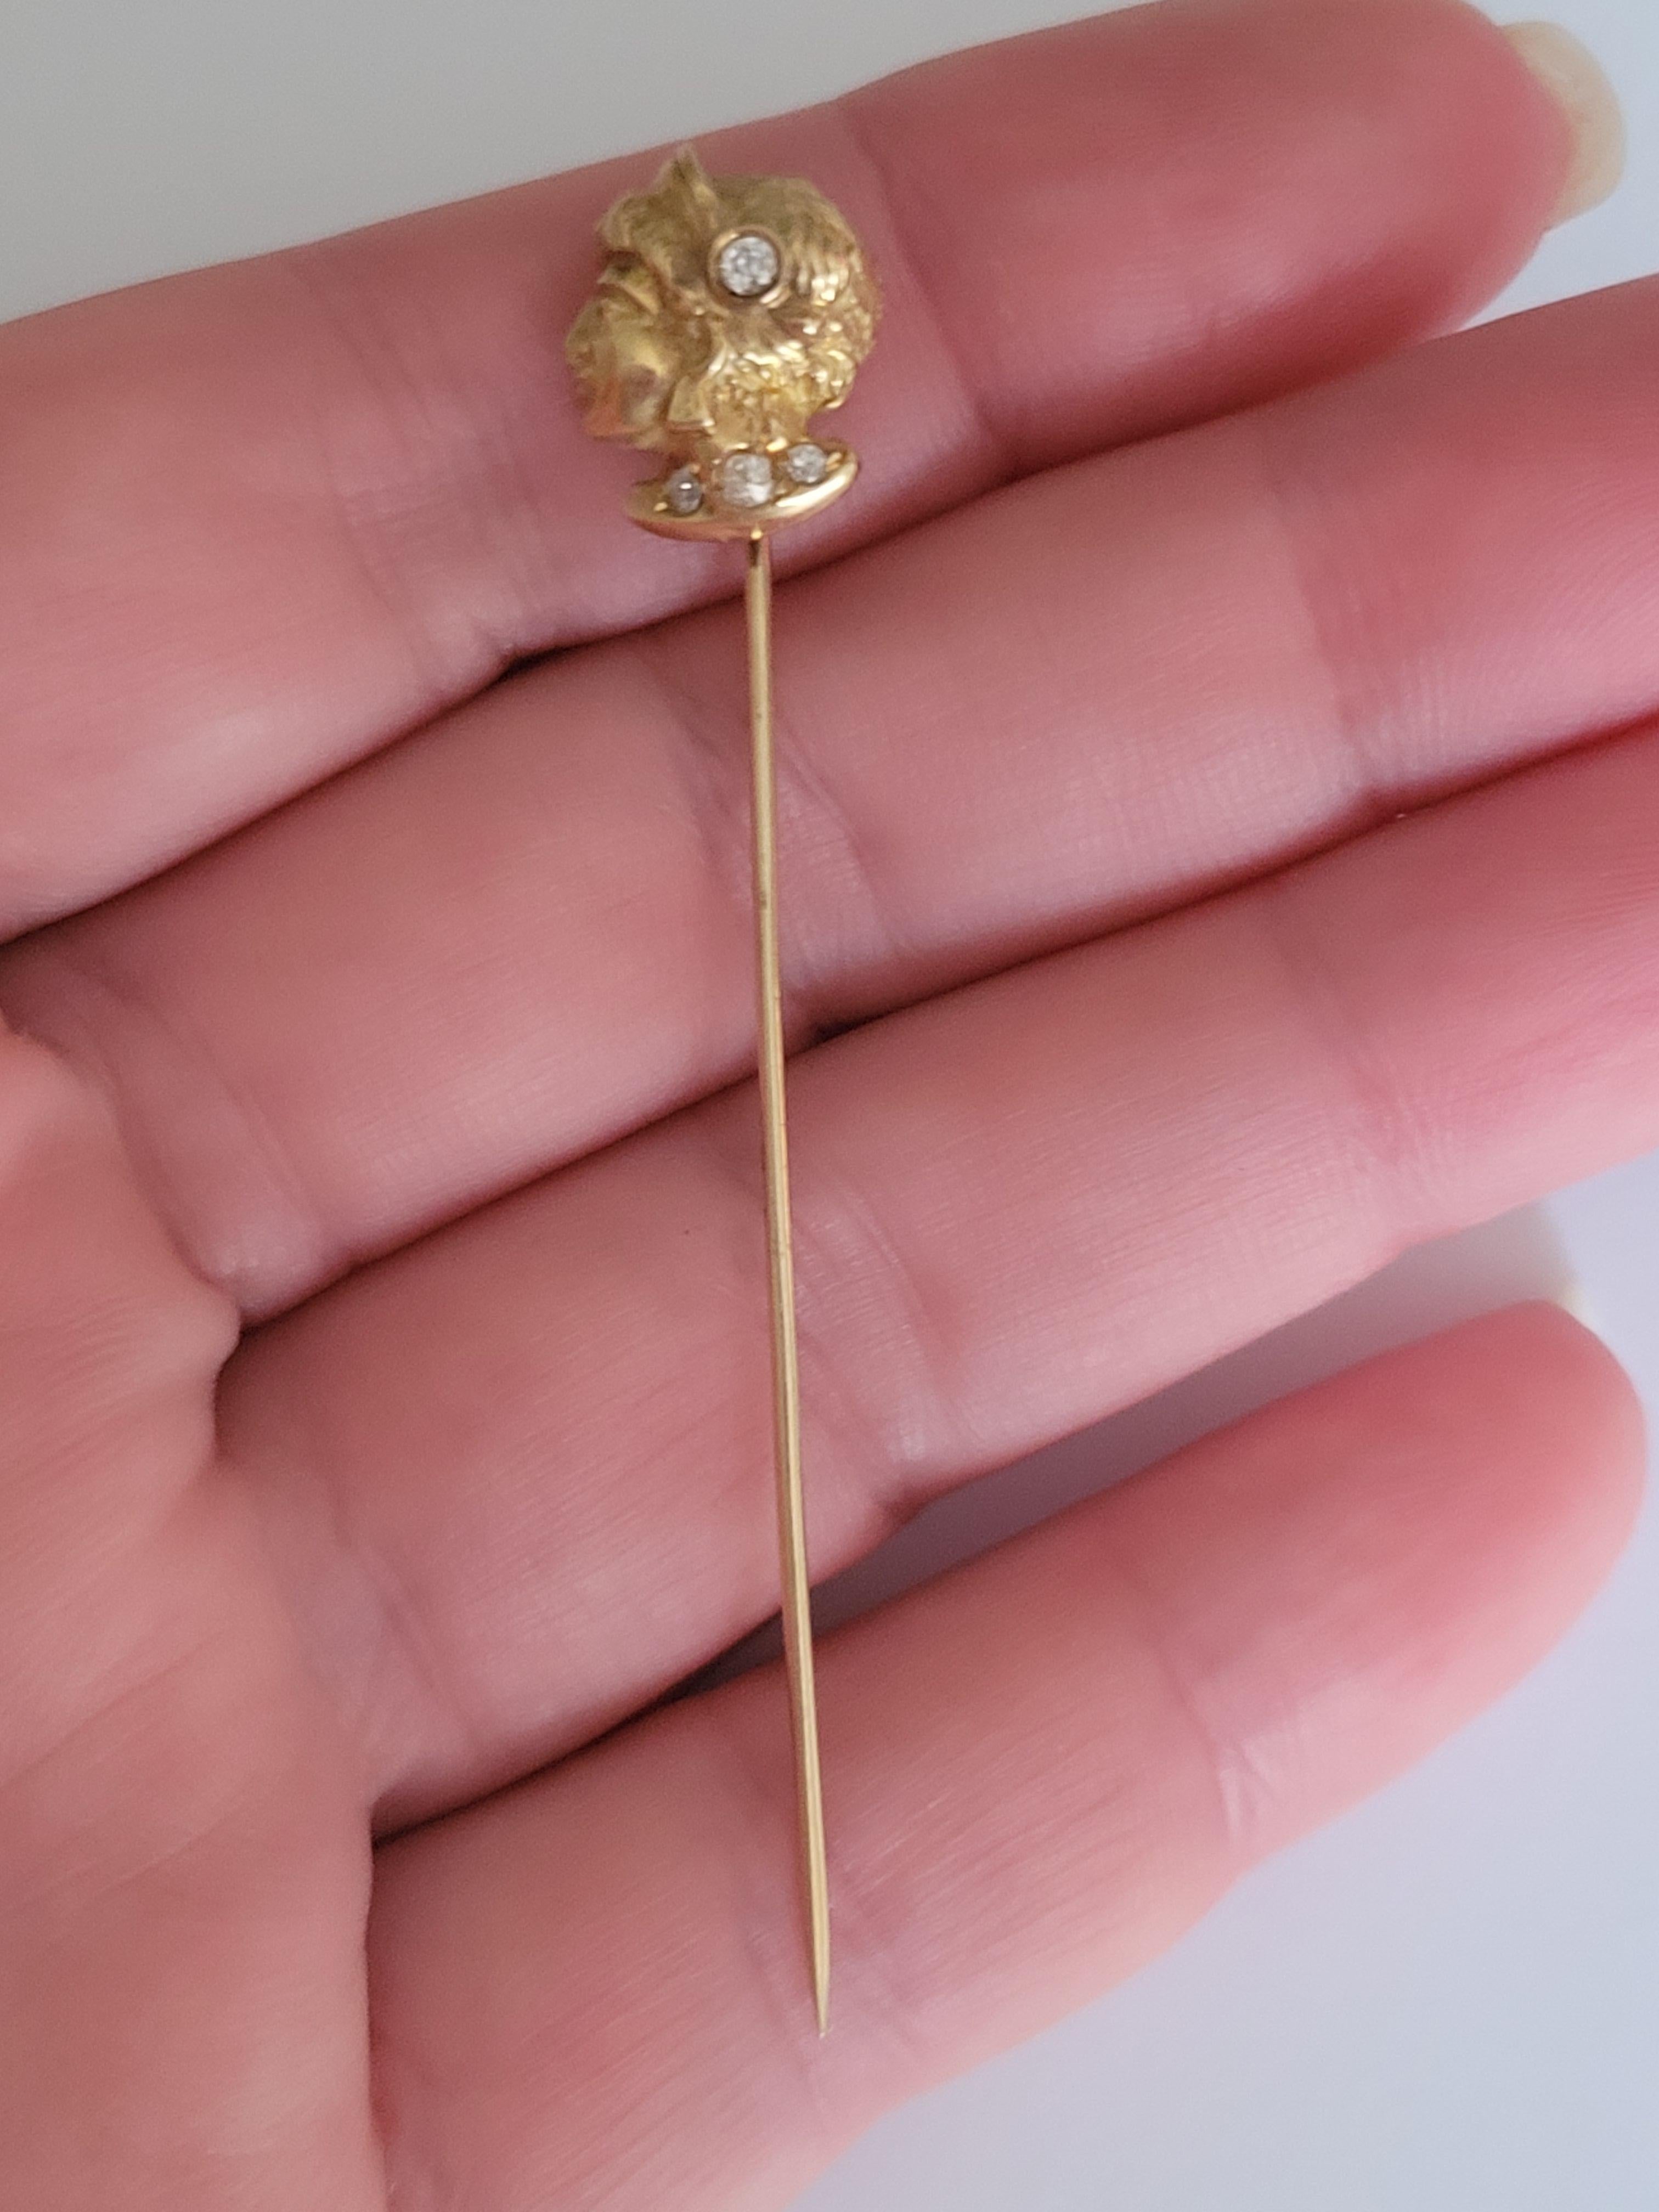 A Gorgeous Art Nouveau c.1900 18 Karat Gold and Diamond Young Maiden stick pin. Possibly French origin.
Length 67mm.
Head 13mm x 11mm.
Diamond approx. from 1.2mm to 2.1mm.
Weight 4.5gr.
Unmarked, tested 18 Karat Gold.
The stick pin in excellent